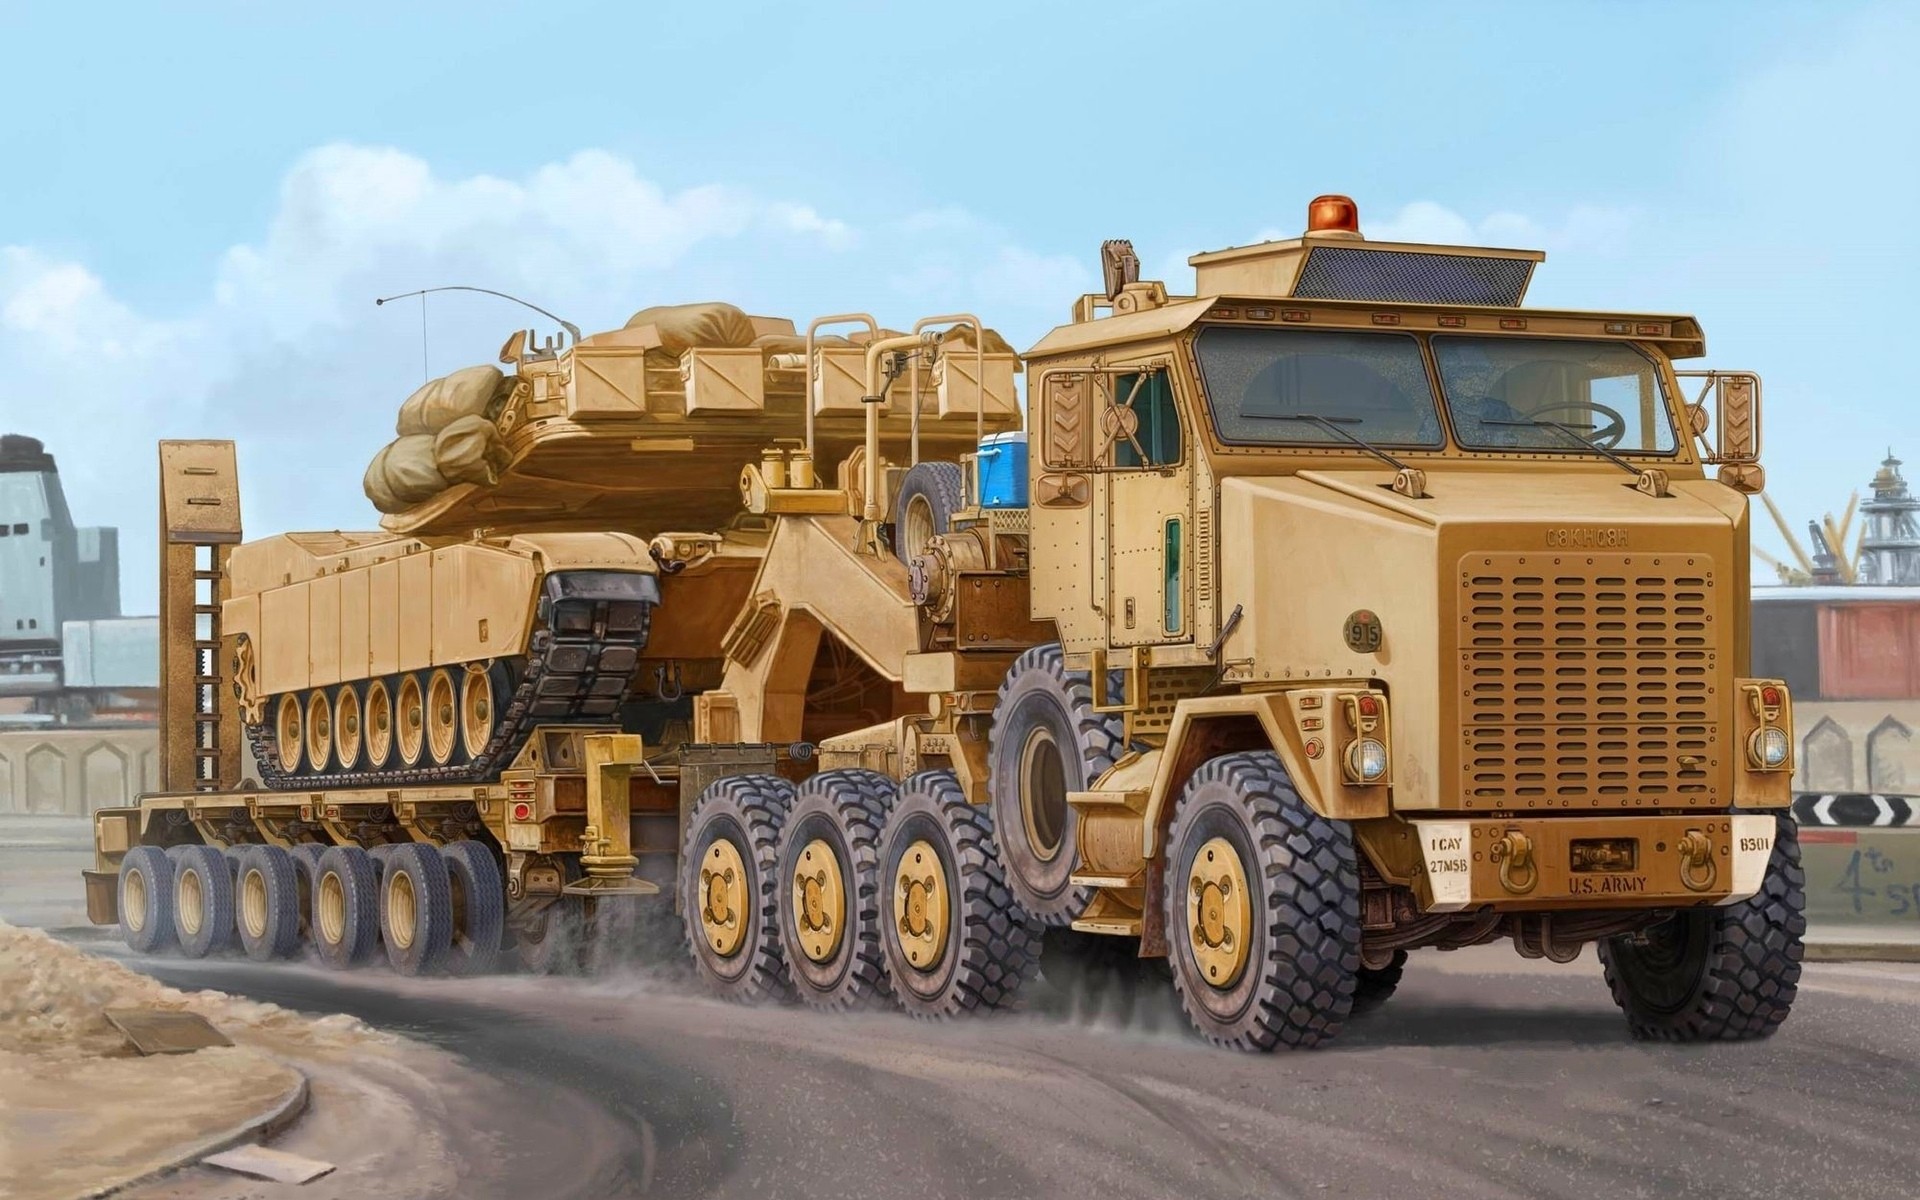 General 1920x1200 M1 Abrams vehicle artwork military military vehicle truck tank United States Army caravan semi truck heavy equipment army American tanks Boxart transport frontal view